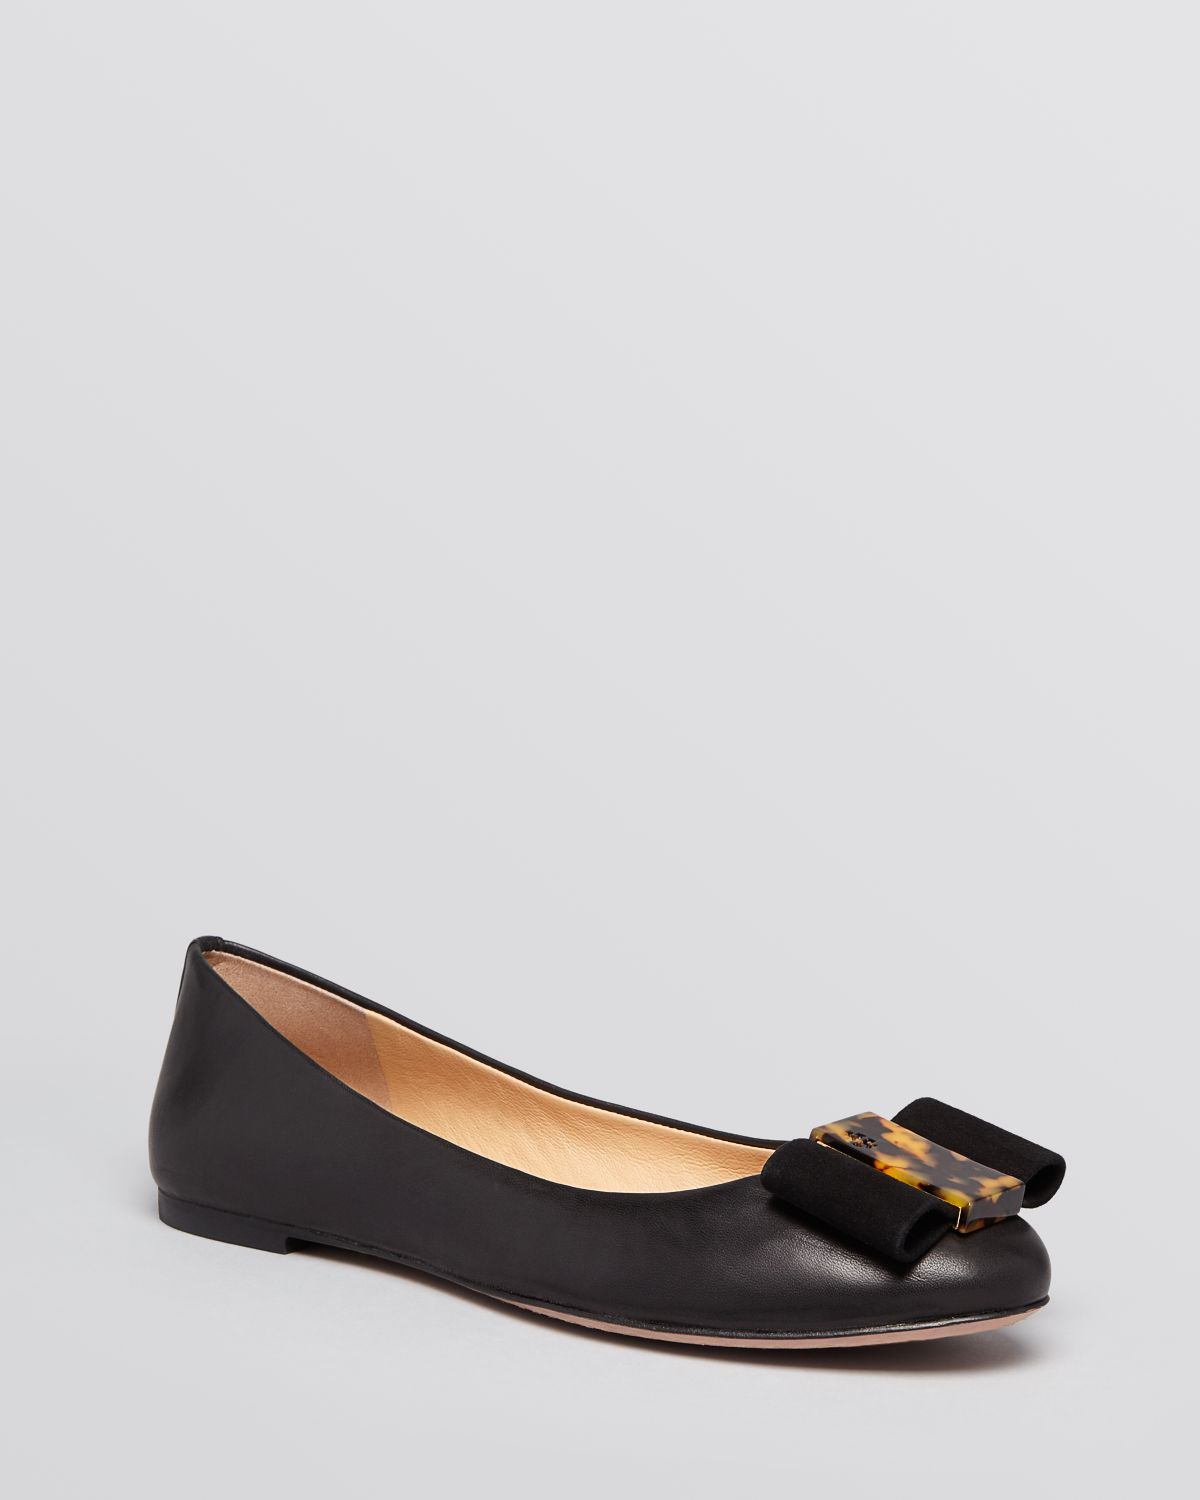 Tory Burch Ballet Flats - Chase Bow in Black | Lyst